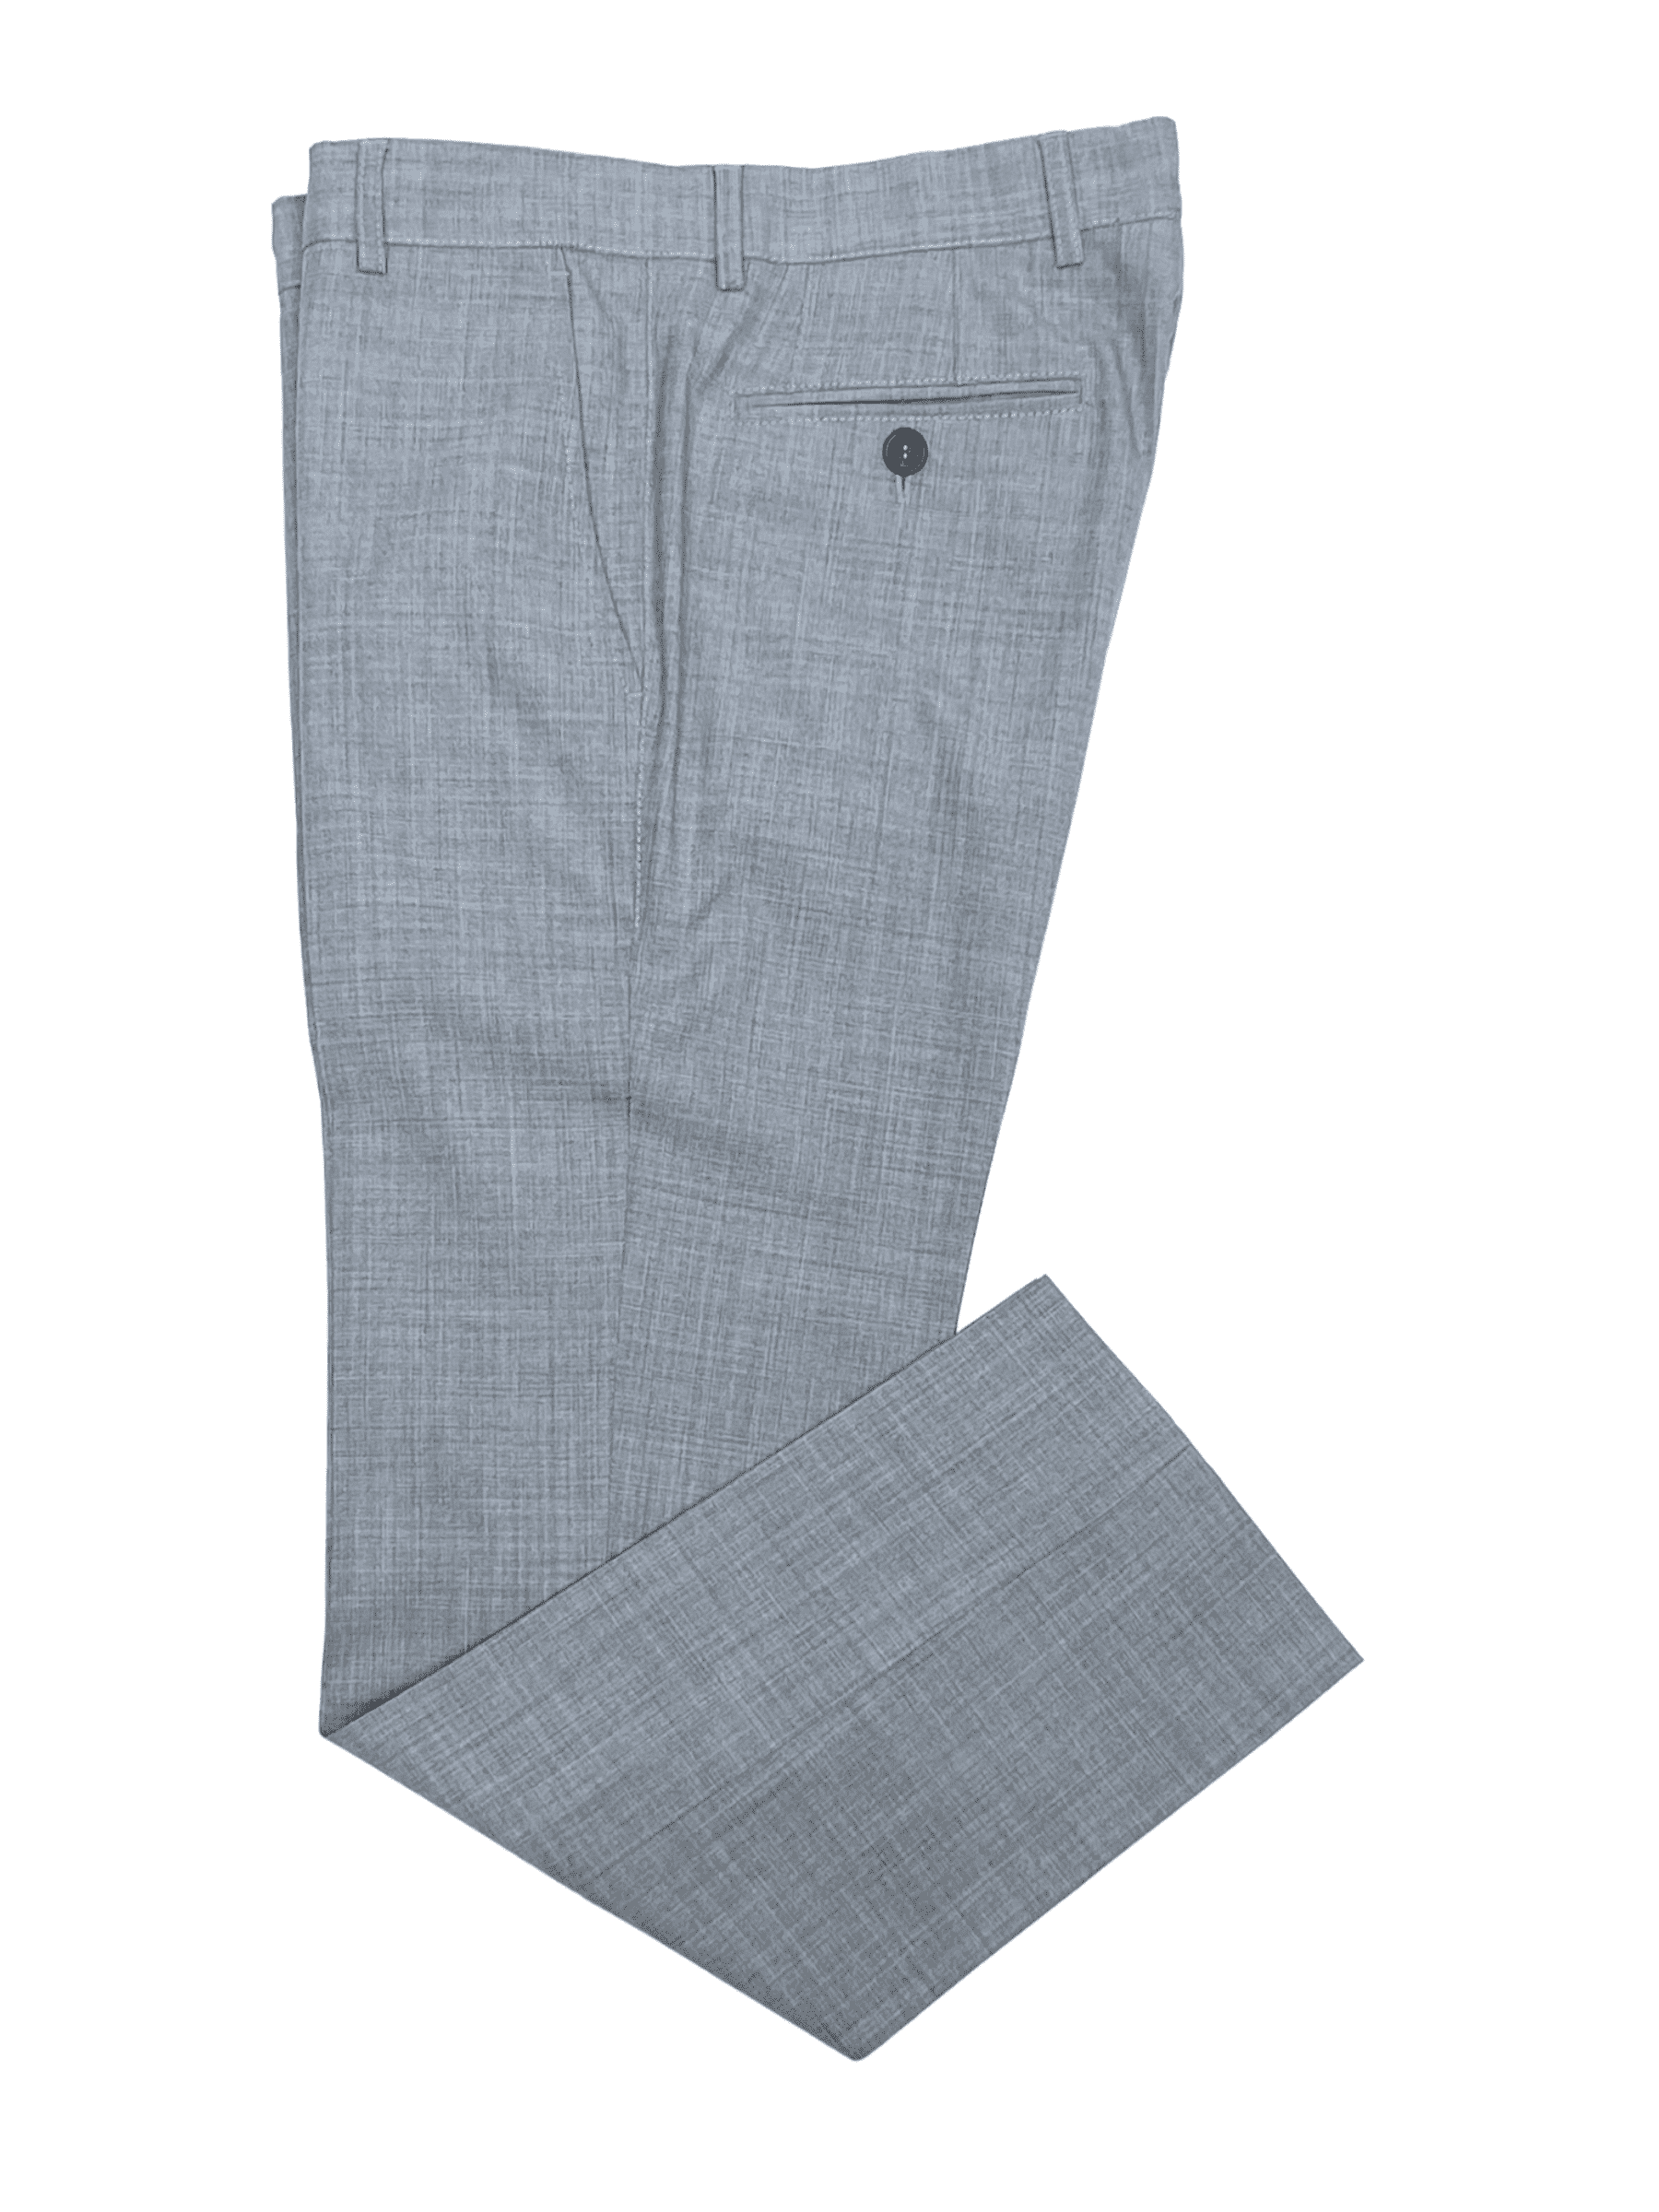 Brunello Cucinelli Grey Dress Pants 30W 27L - Genuine Design Luxury Consignment Calgary, Alberta, Canada New and Pre-Owned Clothing, Shoes, Accessories.